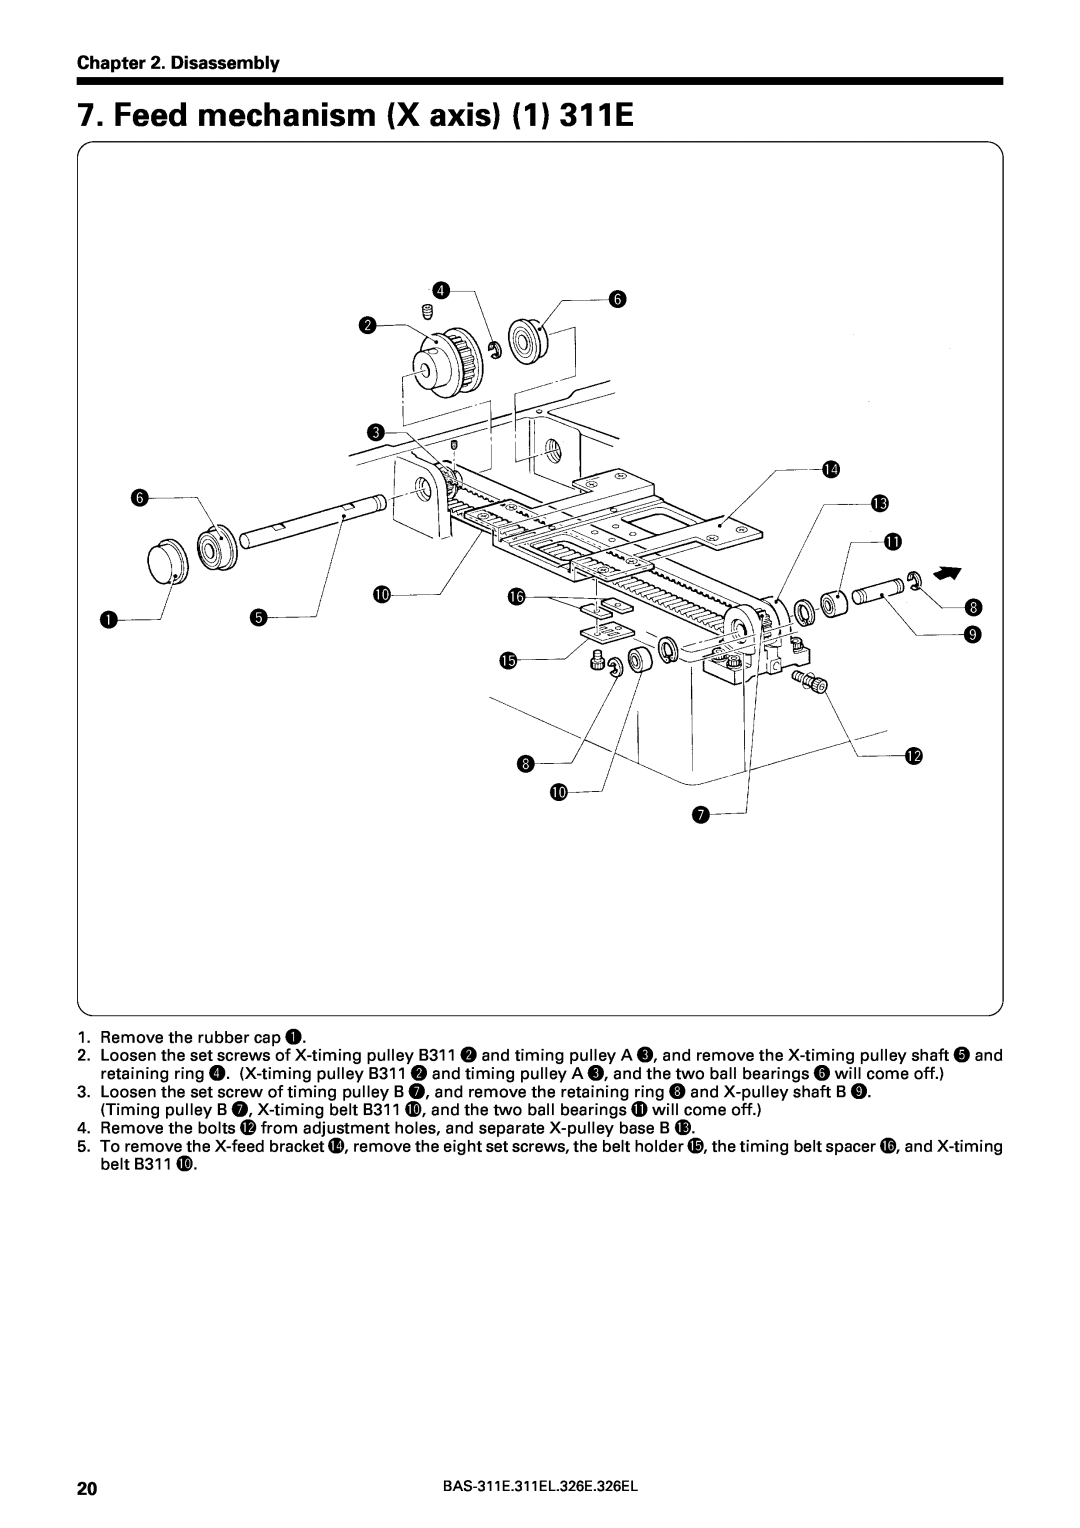 Brother BAS-311E service manual Feed mechanism X axis 1 311E, Disassembly, r y w e 